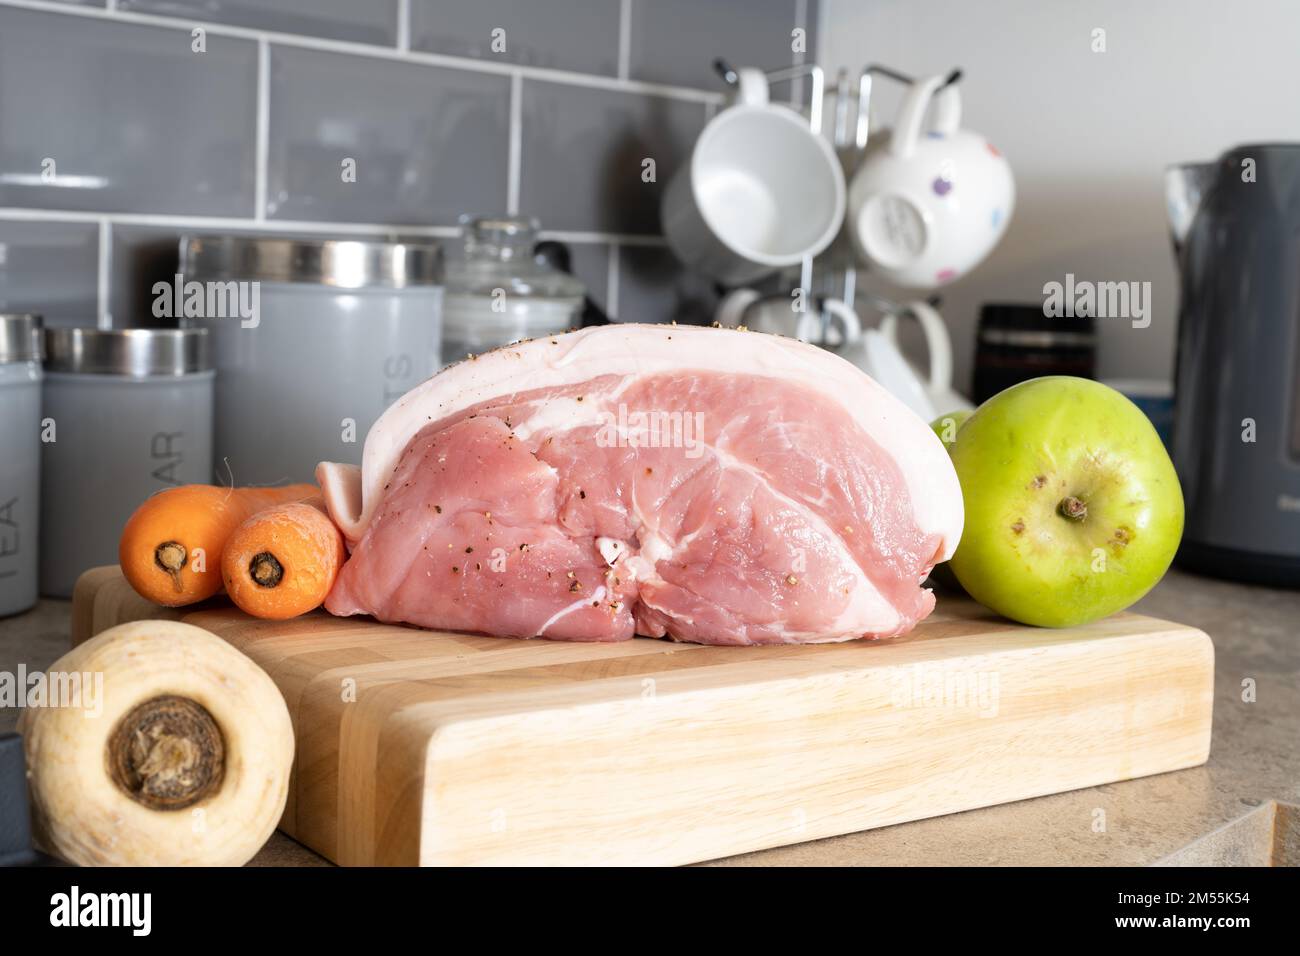 raw uncooked  Pork leg shoulder joint with cooking apple parsnip and carrots  on a wooden chopping board Stock Photo